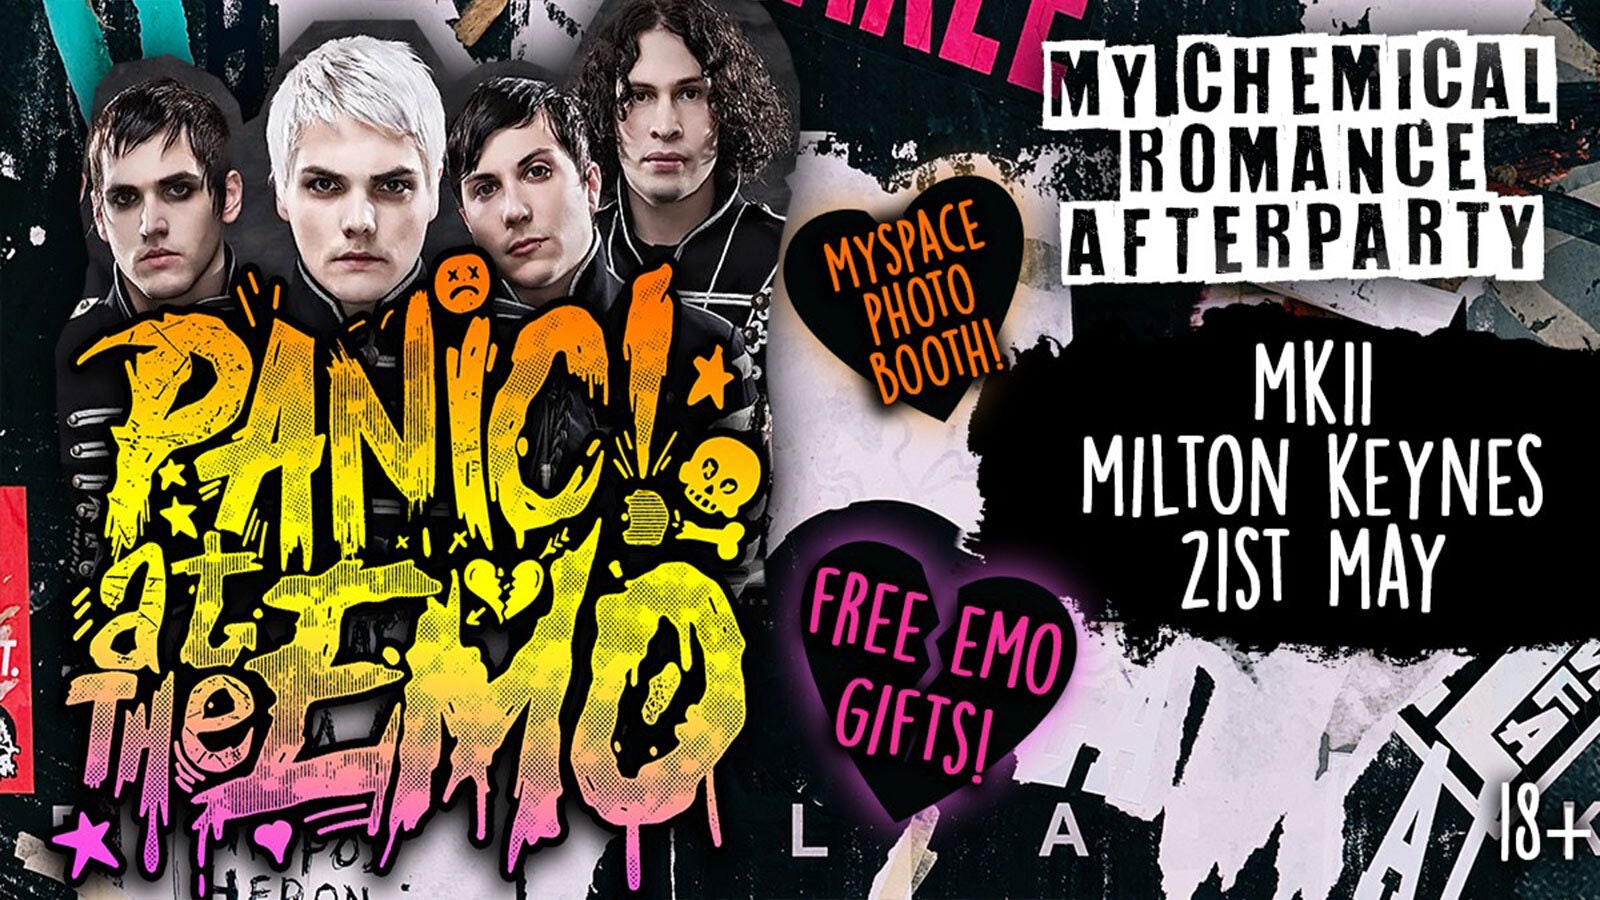 Panic! At The Emo: My Chemical Romance Afterparty Special at MK11, Milton Keynes